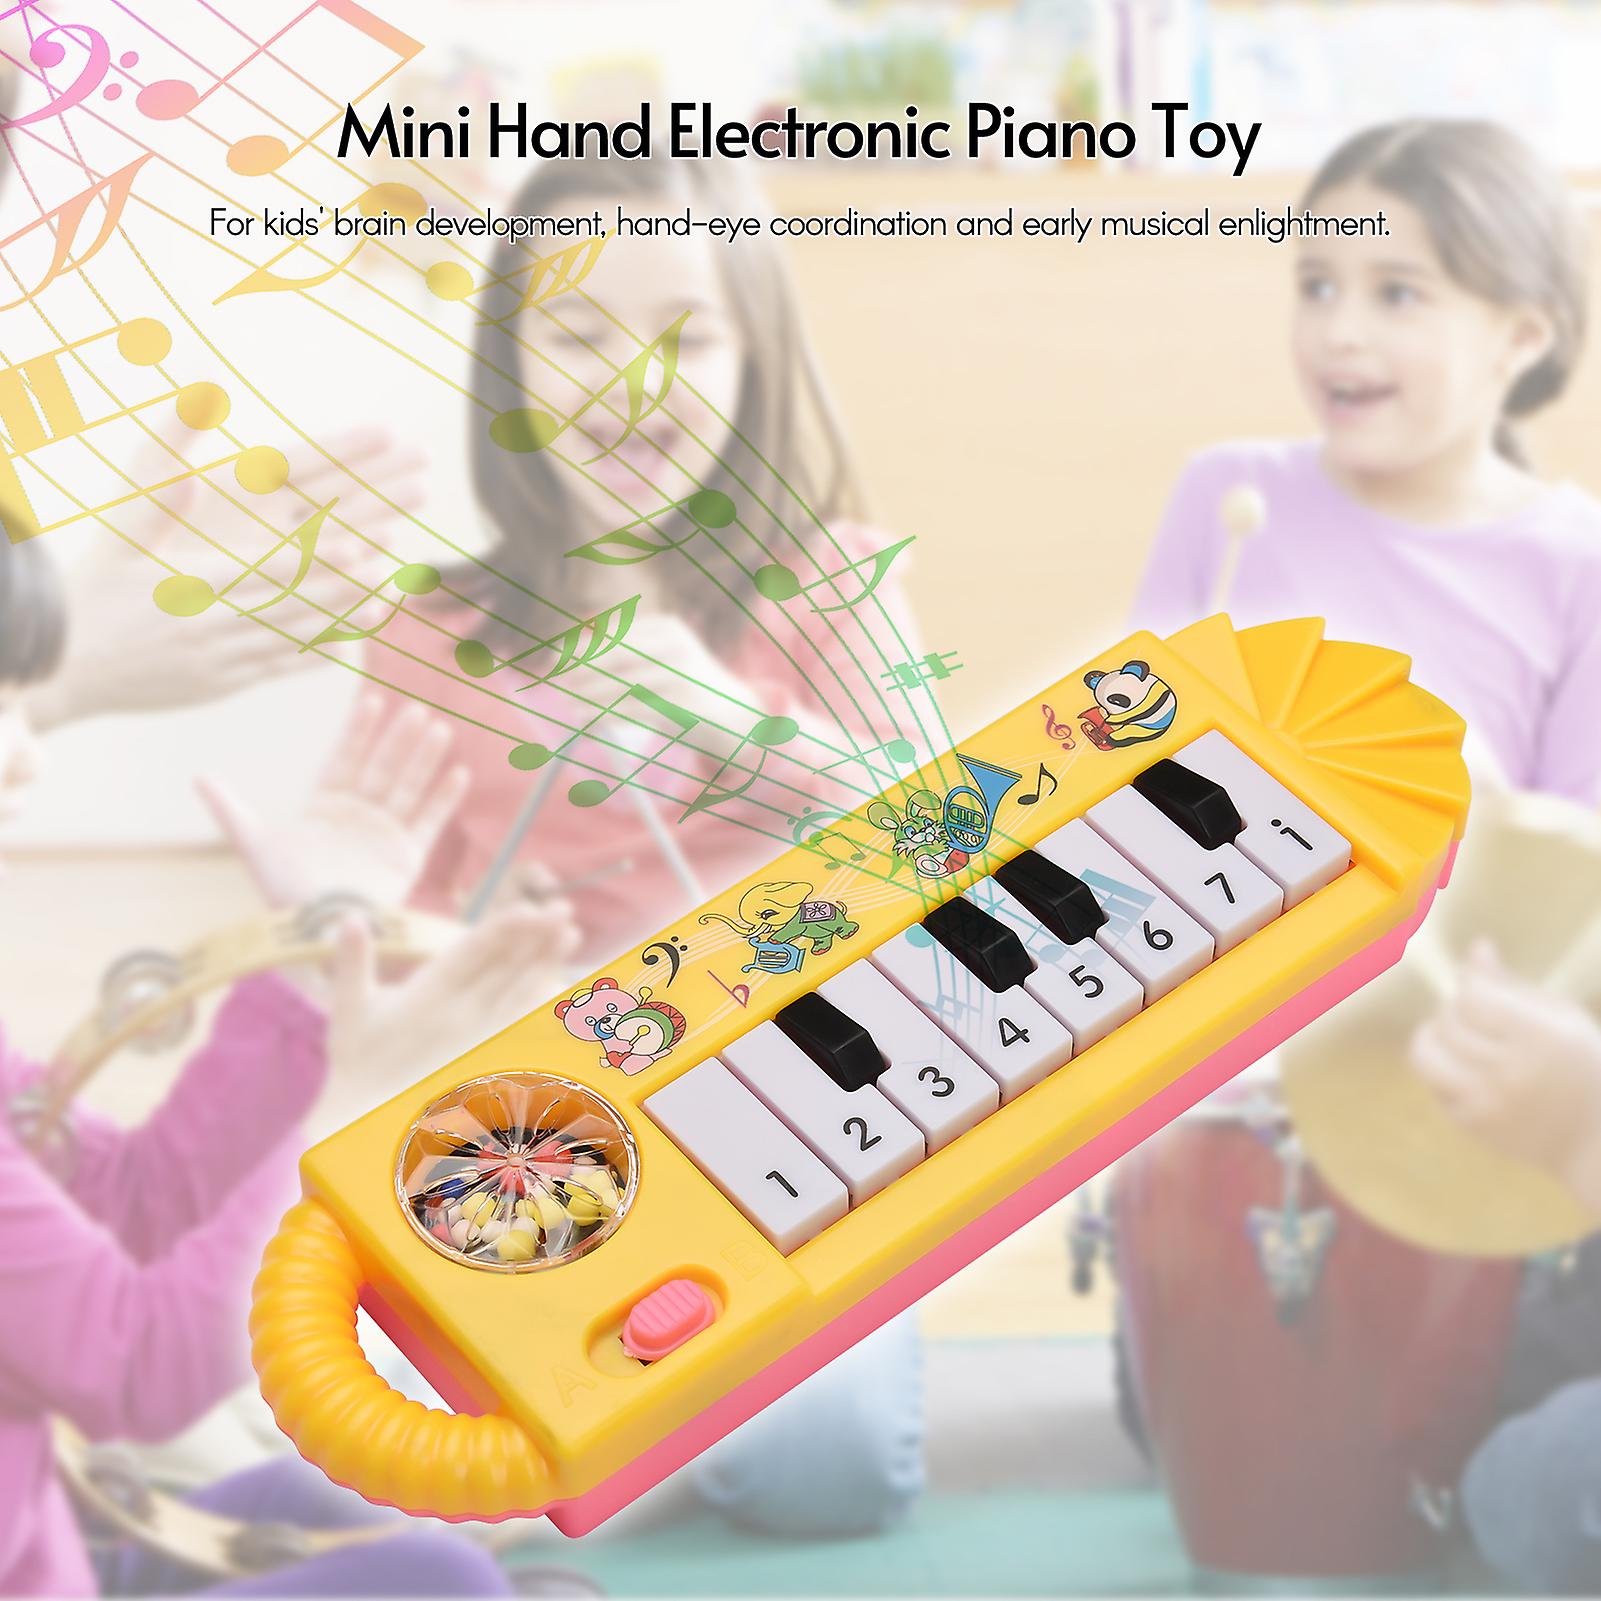 Mini 8-key Electronic Piano Toy For Children Early Musical Education Yellow